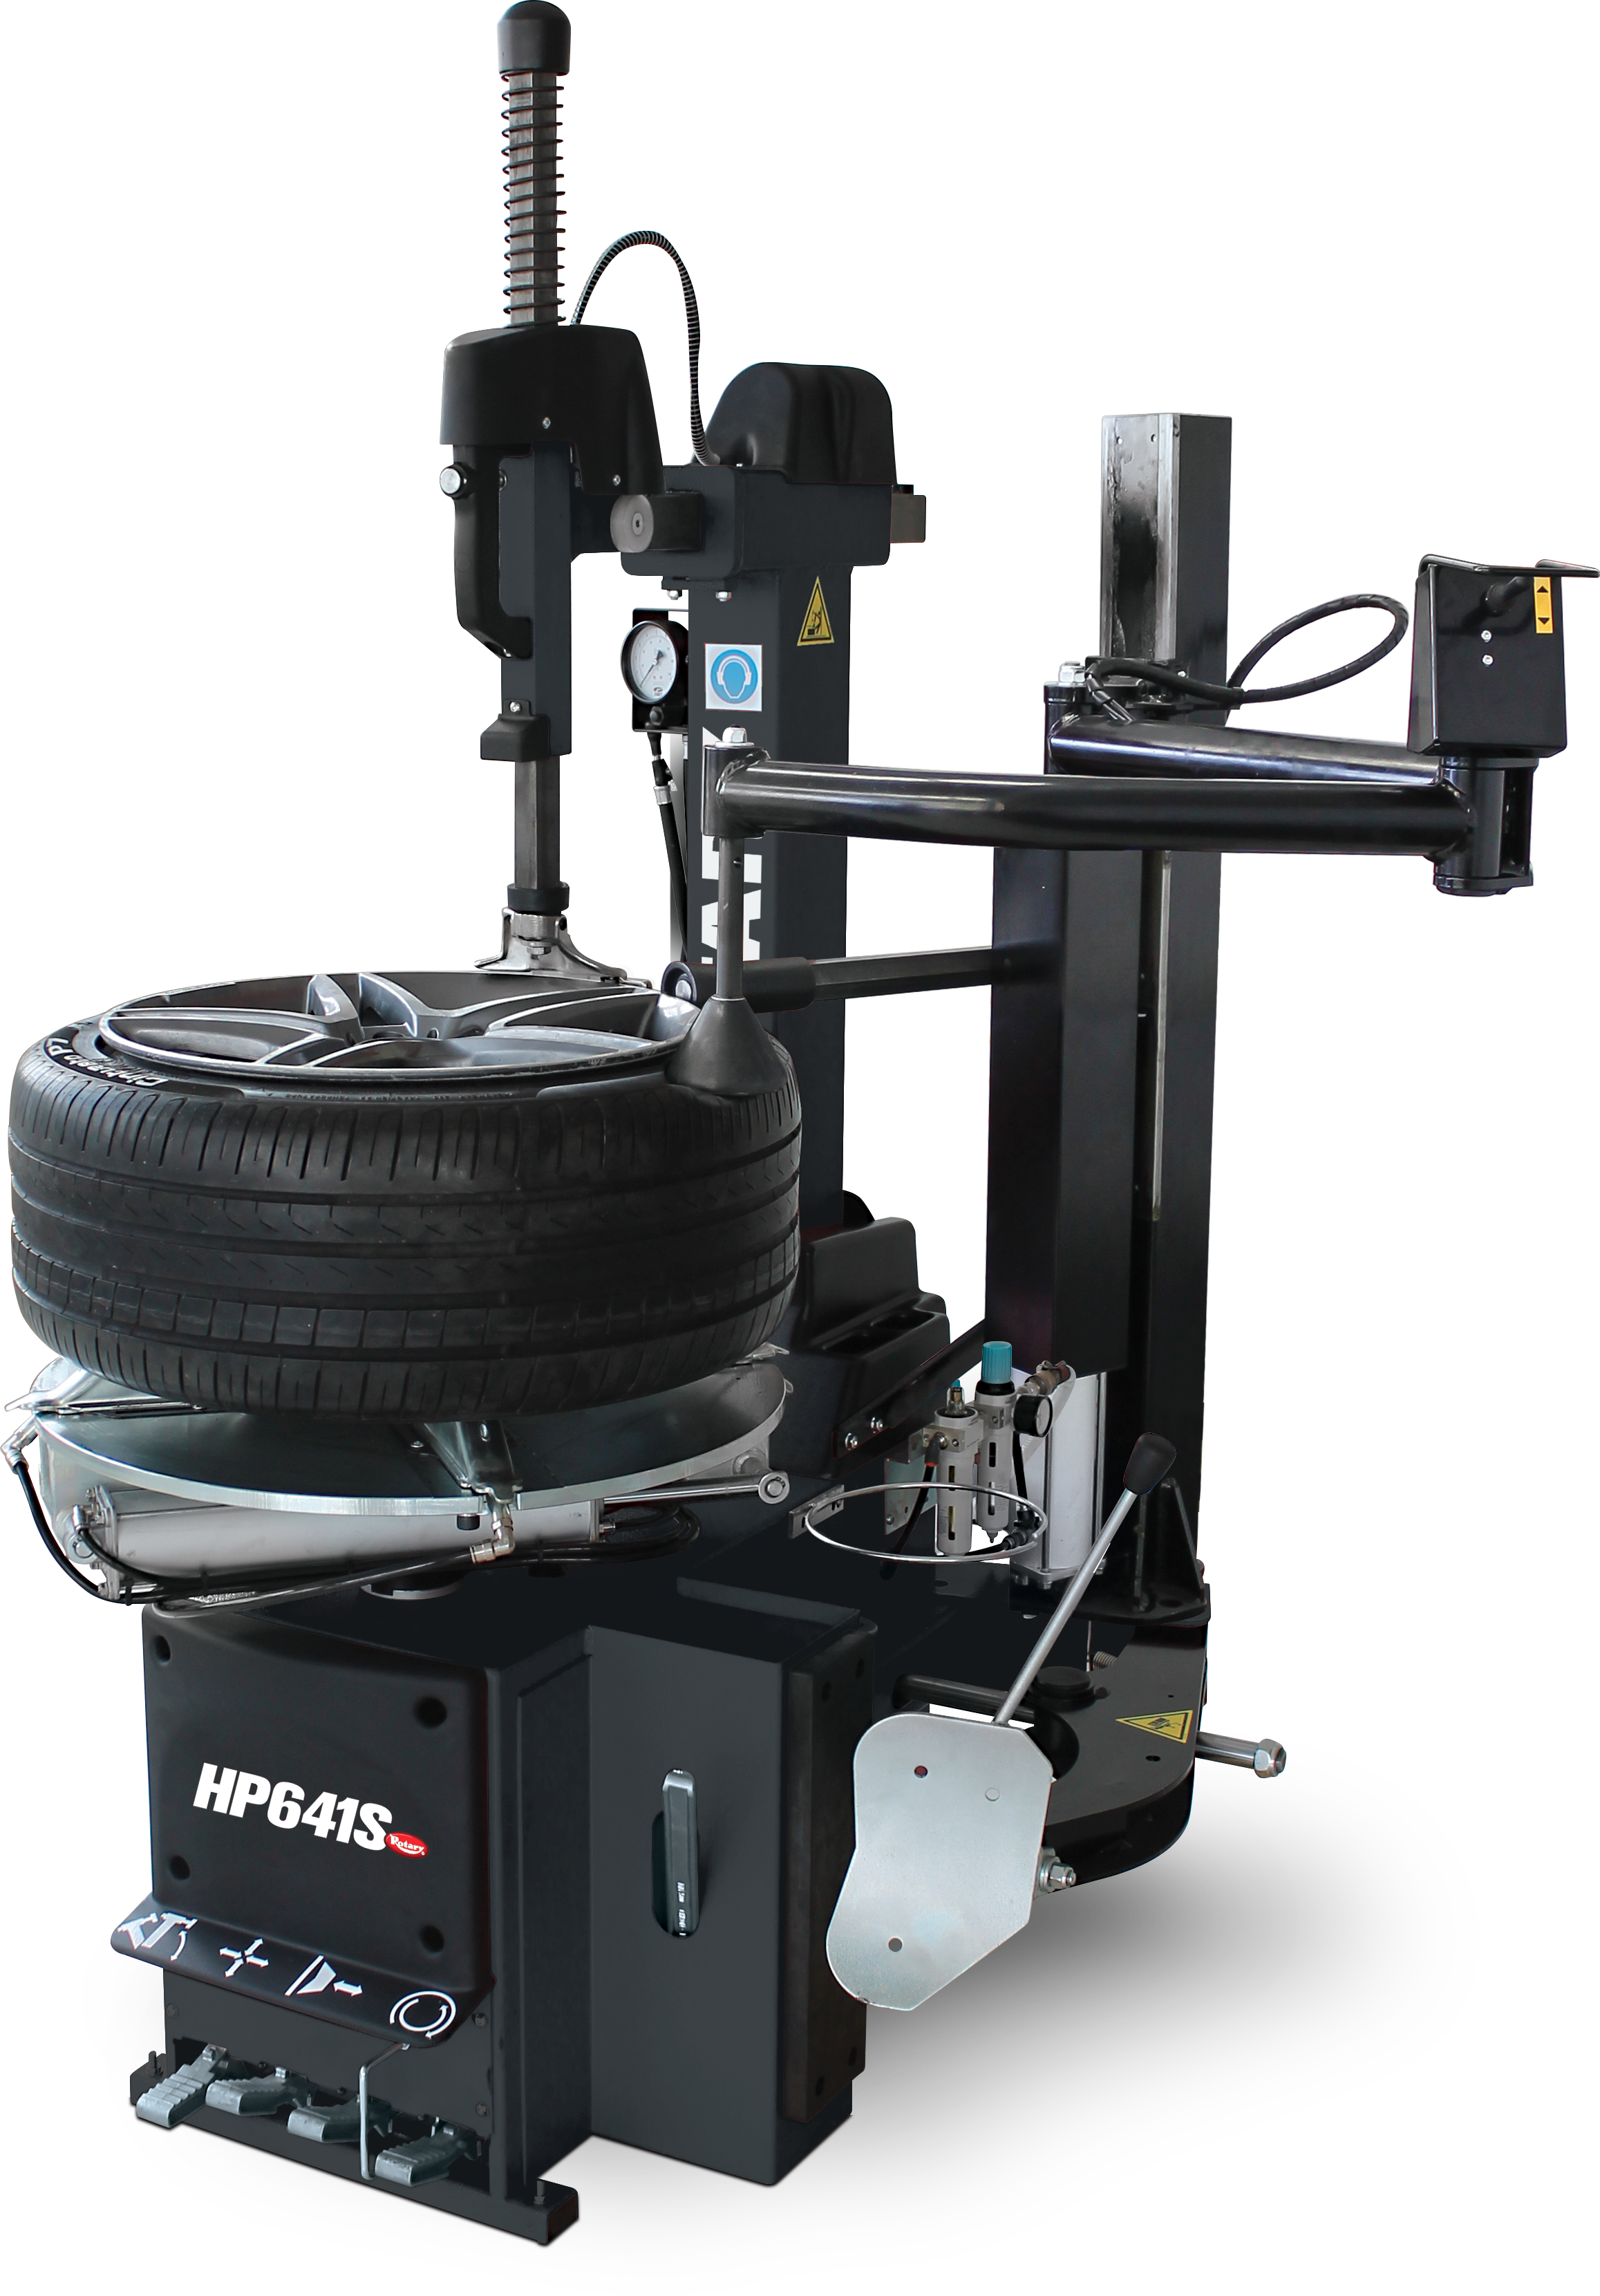 Tyre changer HP641SD.24 Pro